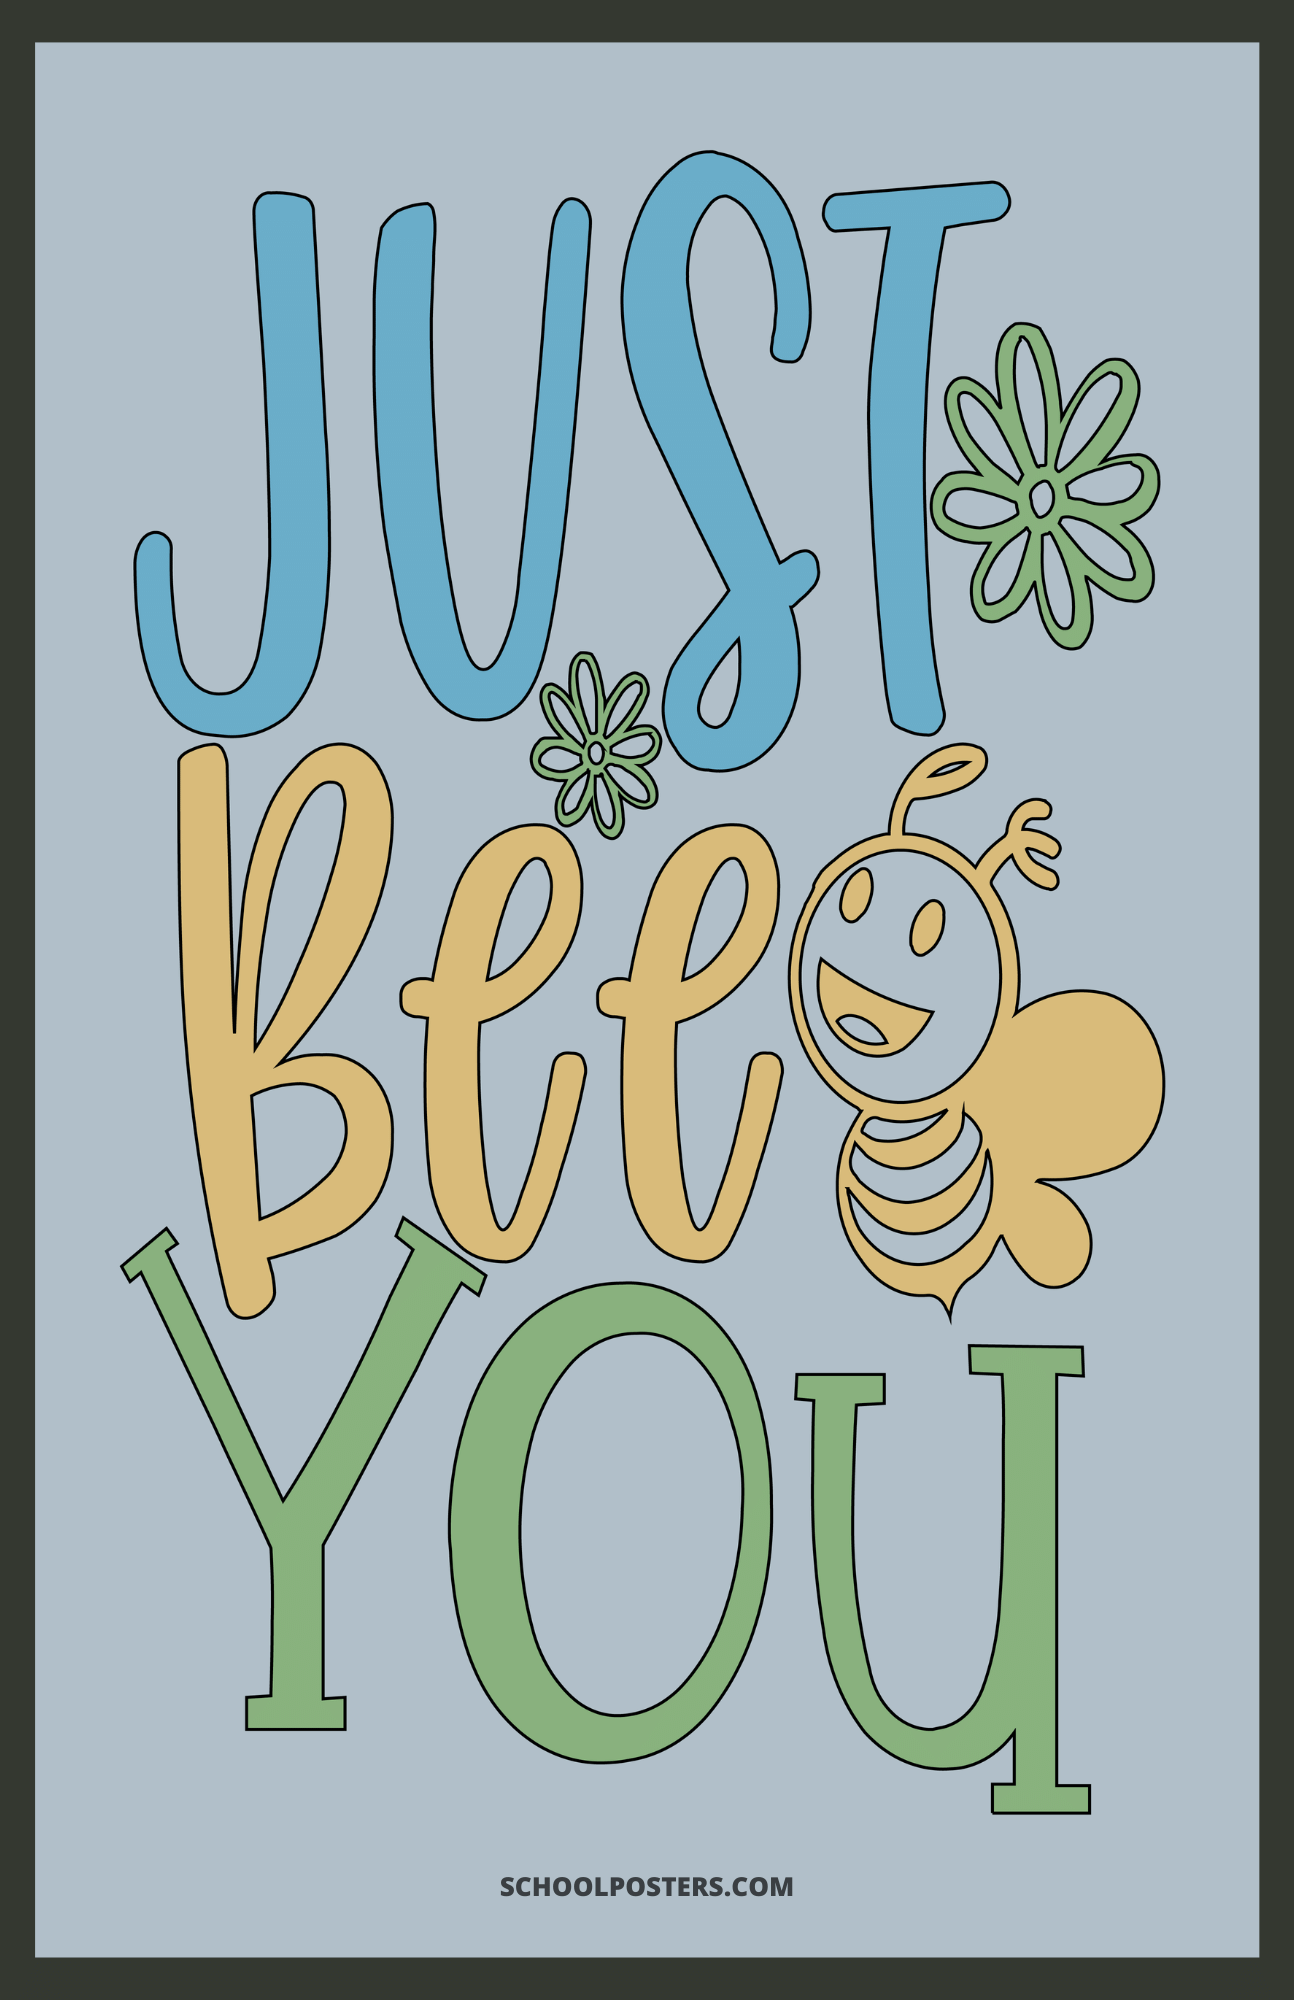 Just Bee You Poster